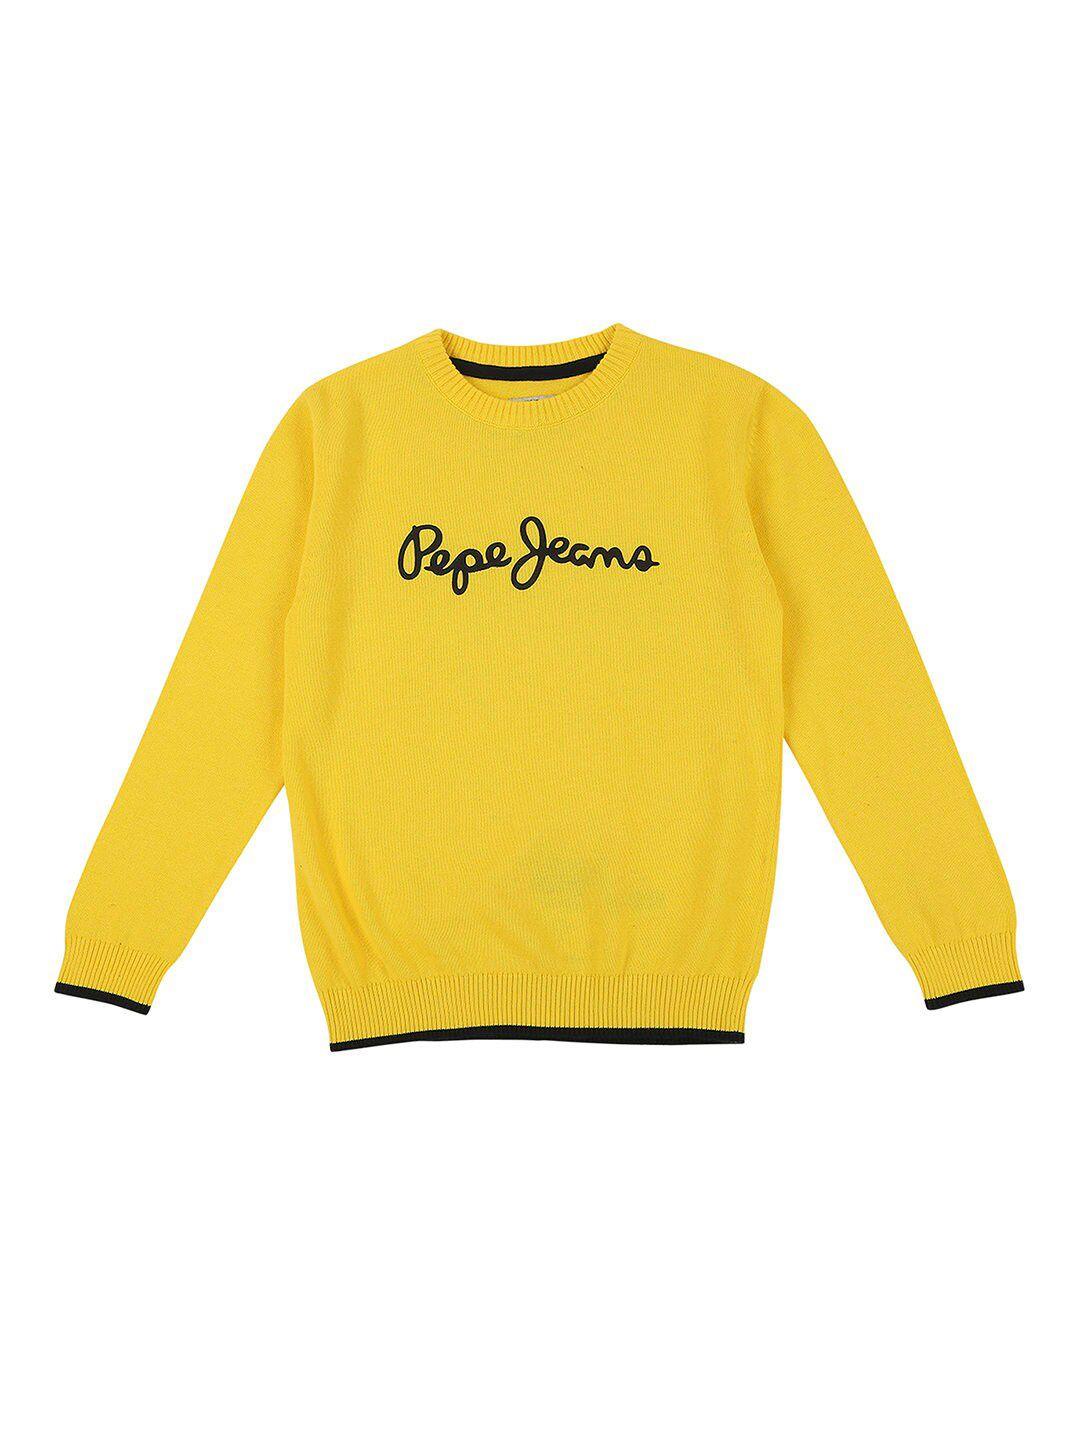 pepe jeans boys gold-toned & black typography sweater vest with embroidered detail